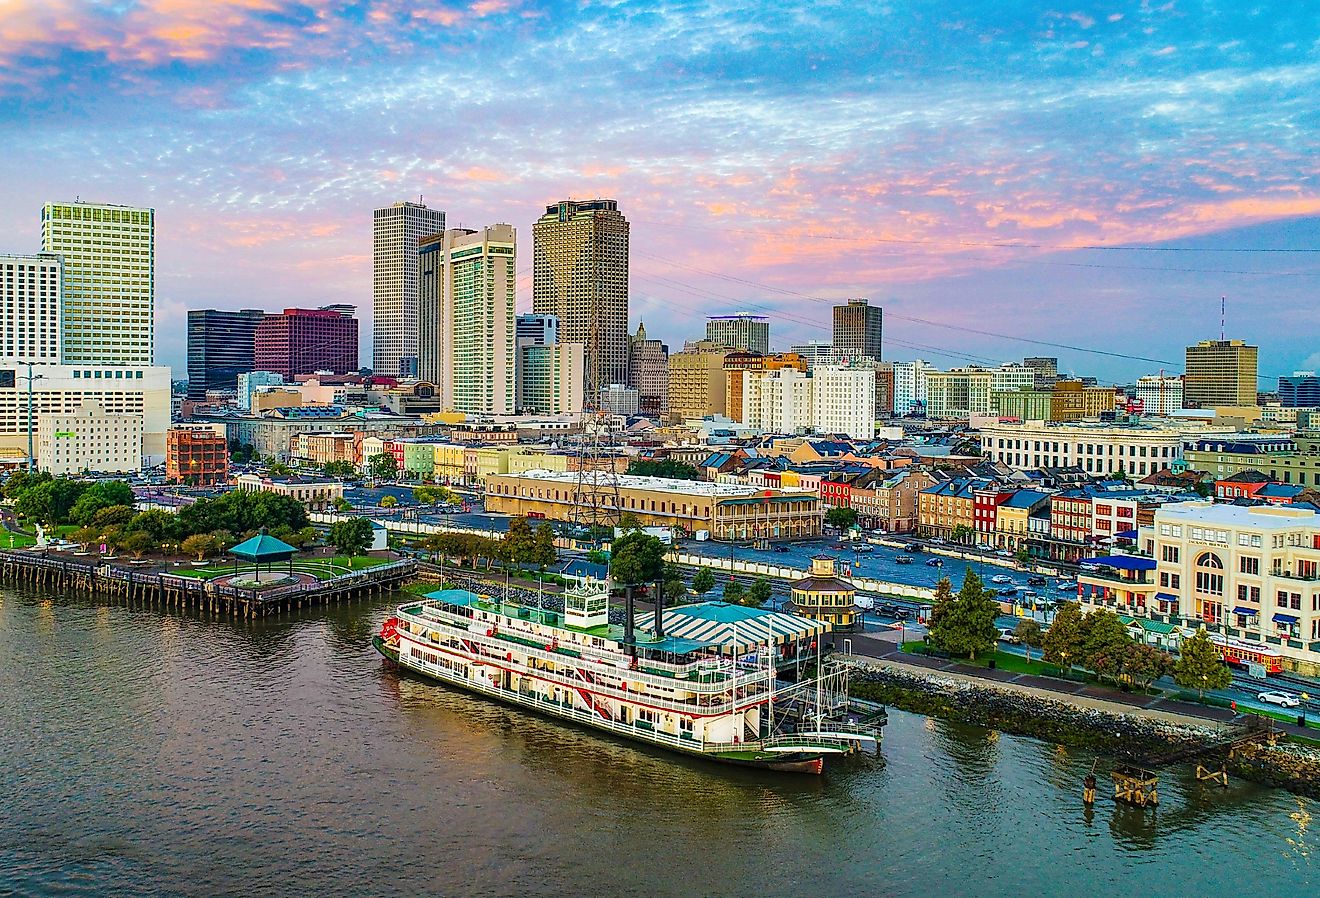 Downtown skyline of New Orleans, Louisiana.